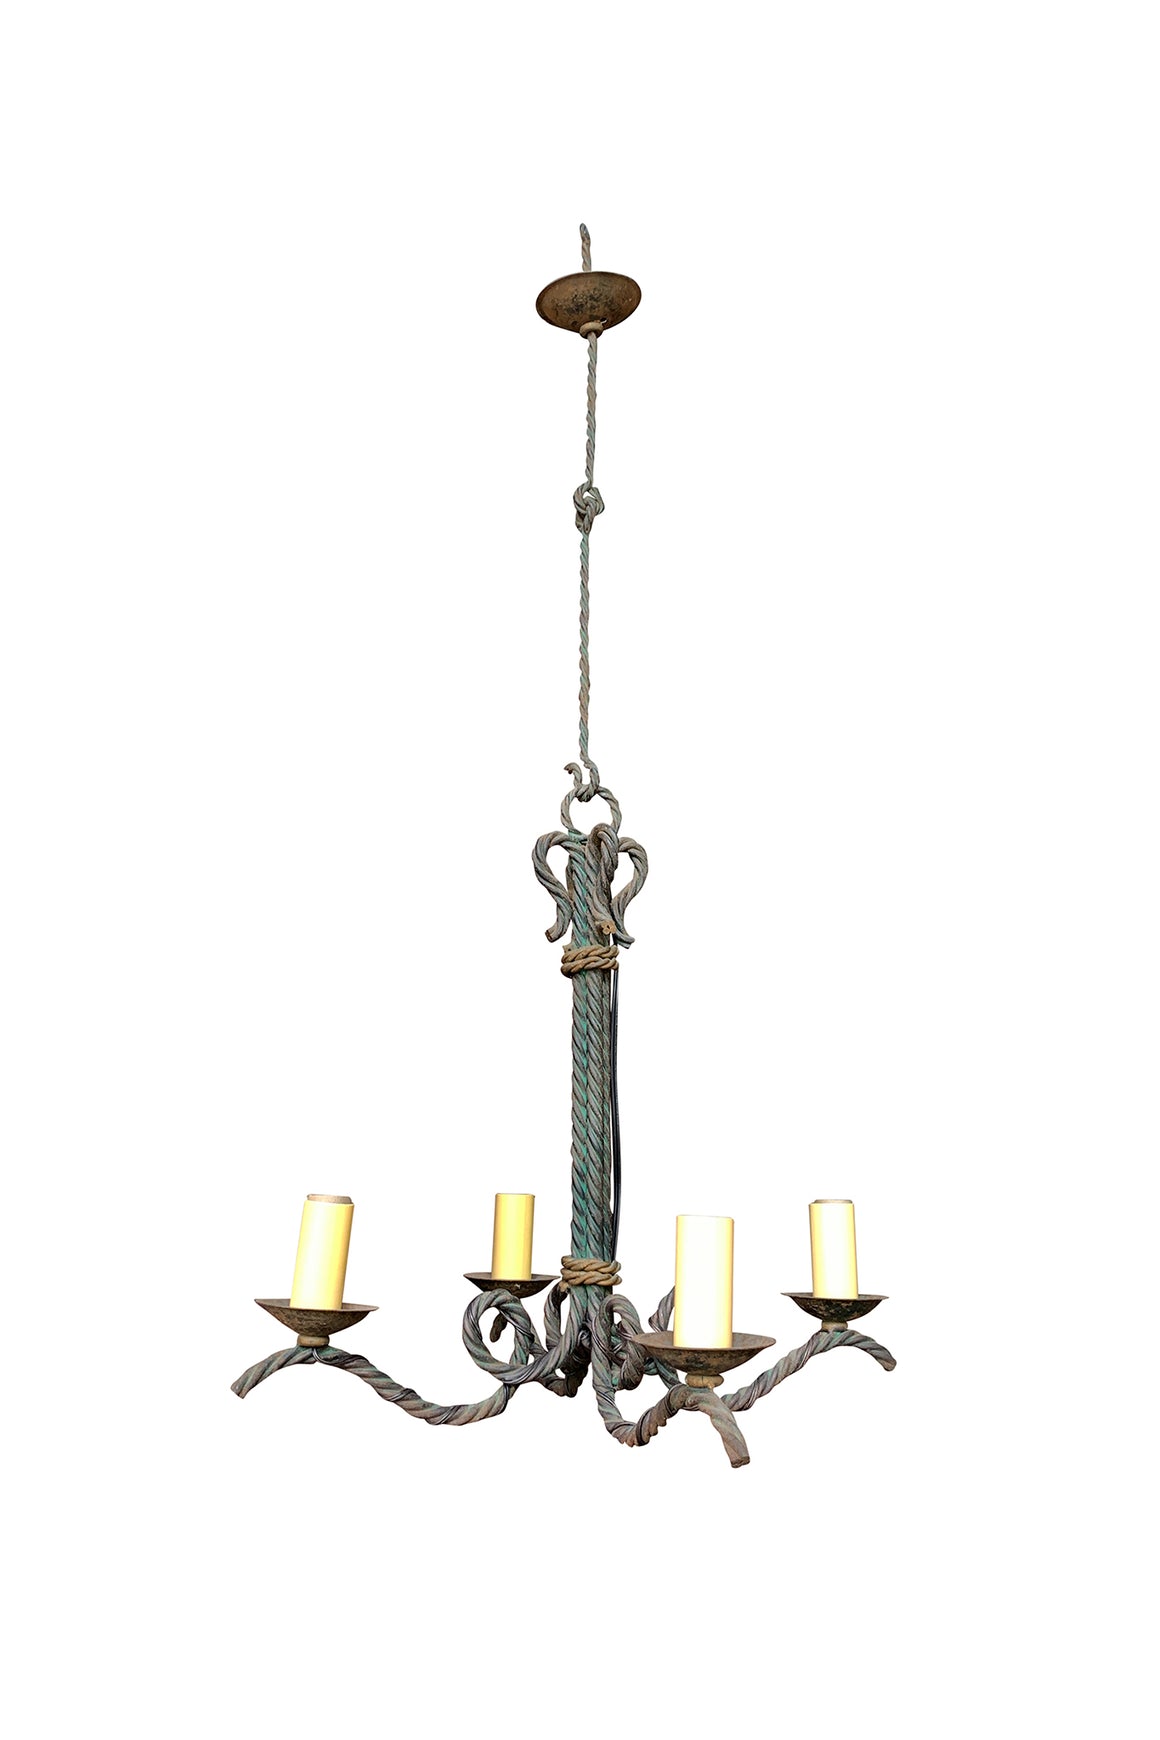 1930s French Wrought Iron Chandelier